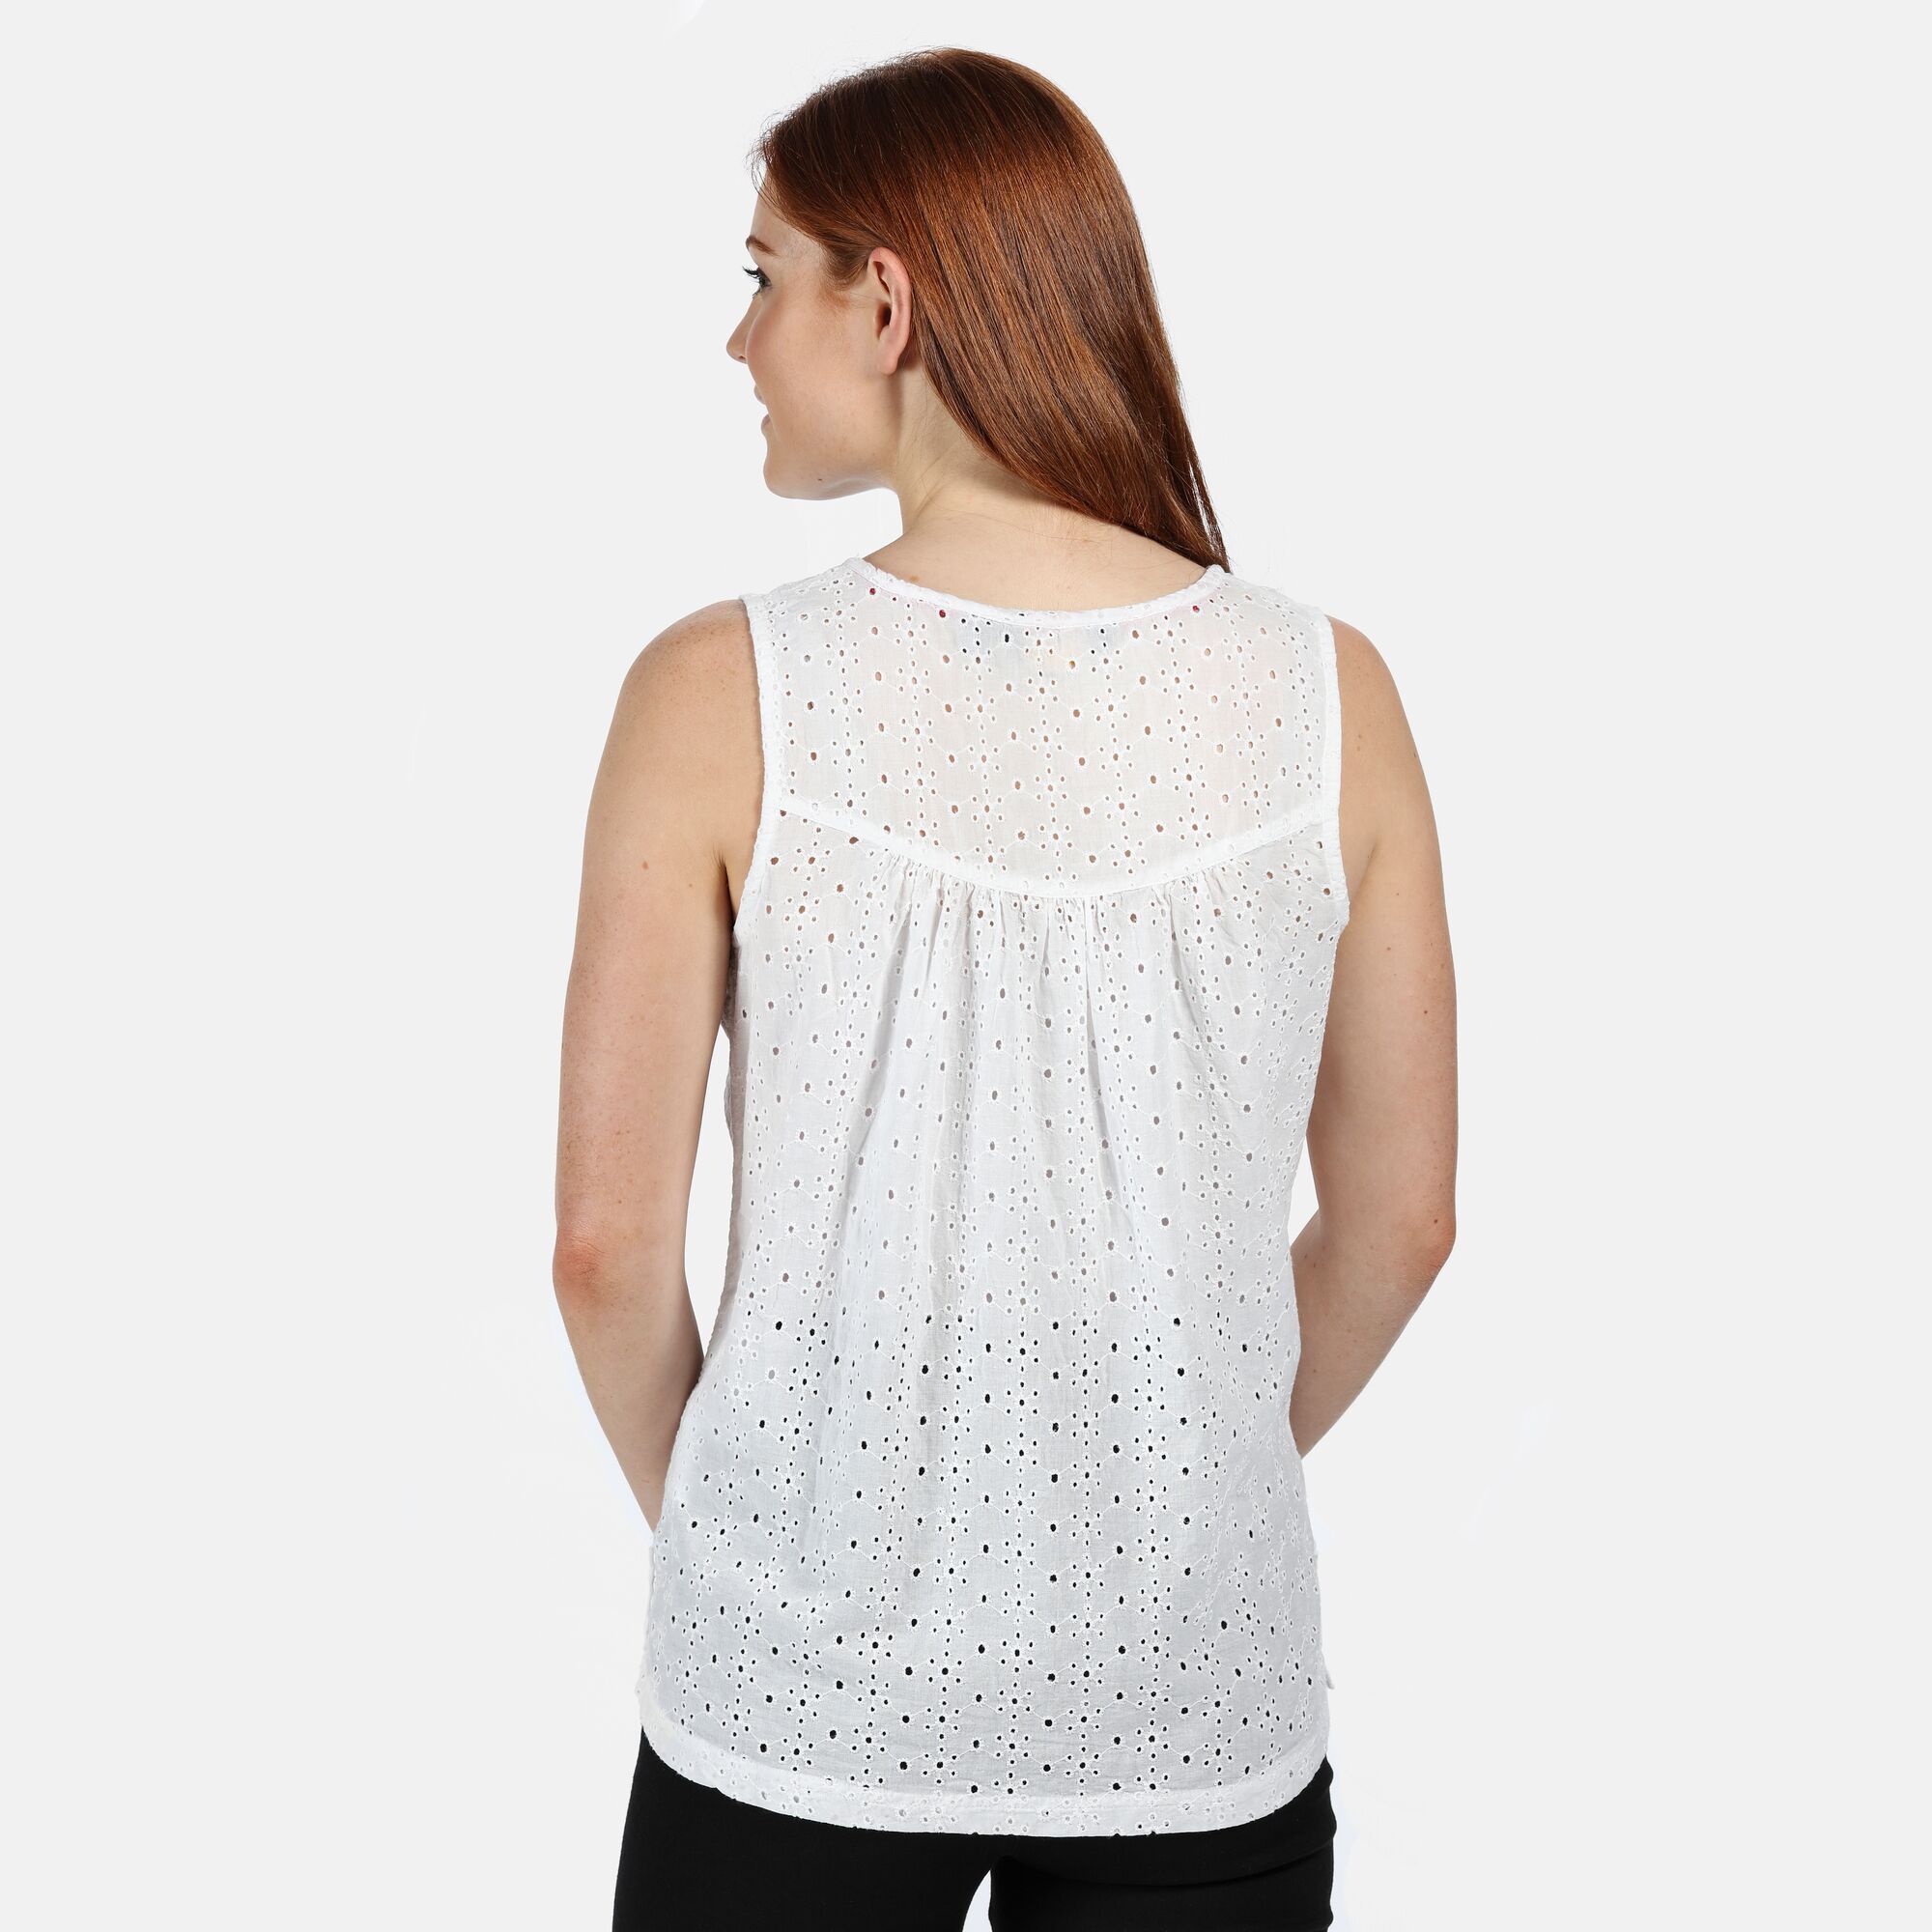 Material: 100% organic cotton. Small v insert to neckline. Side vents.